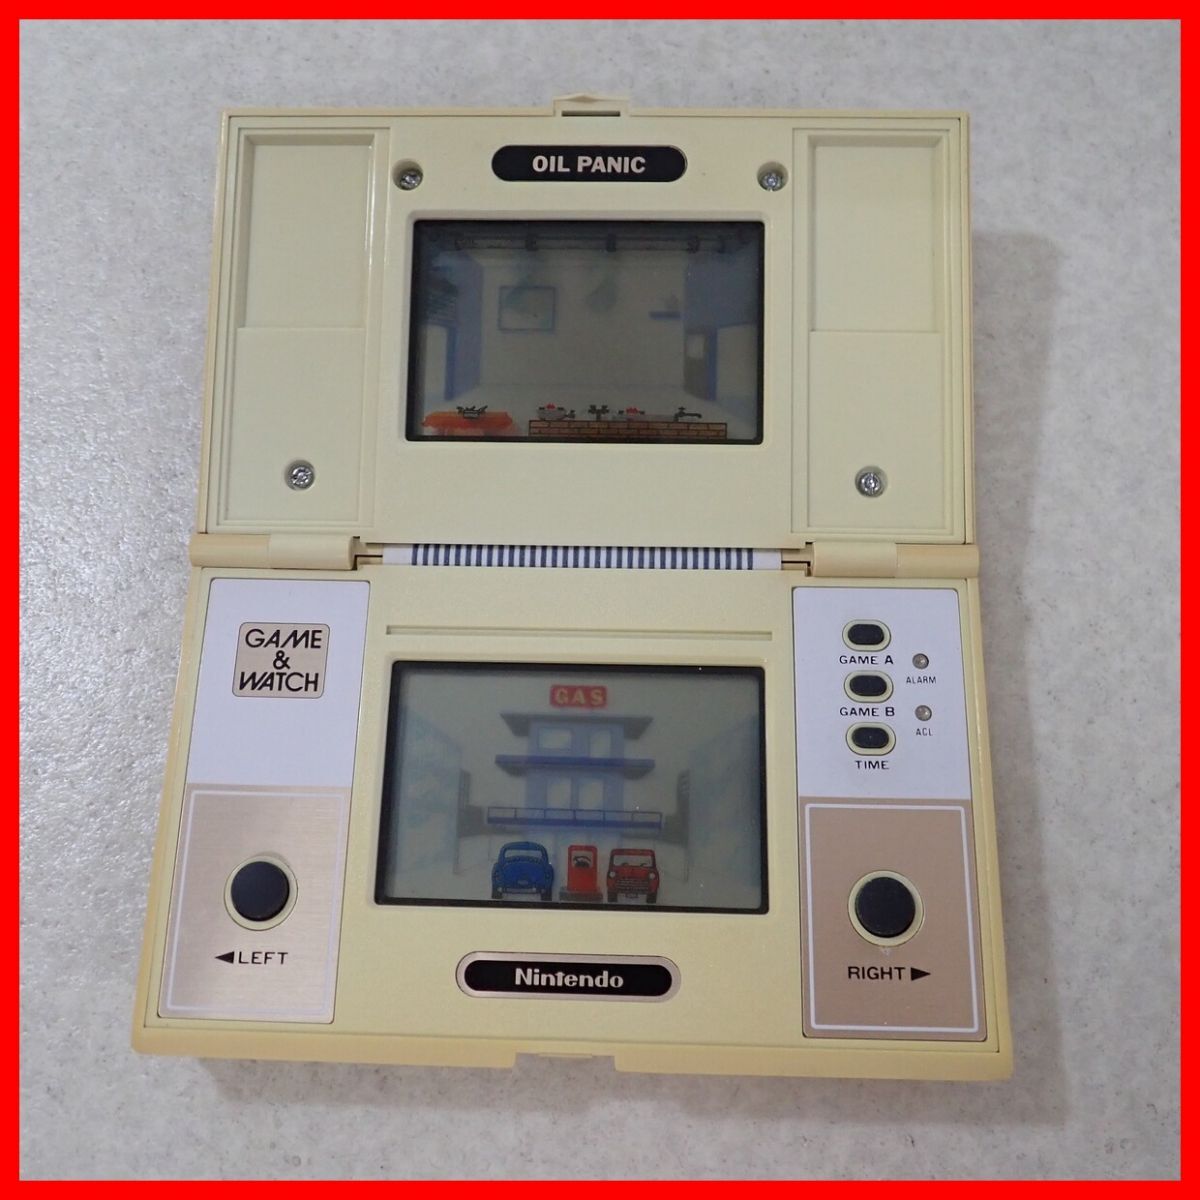  operation goods GAME&WATCH MULTI SCREEN game & watch OIL PANIC oil Panic OP-51 Nintendo nintendo [10